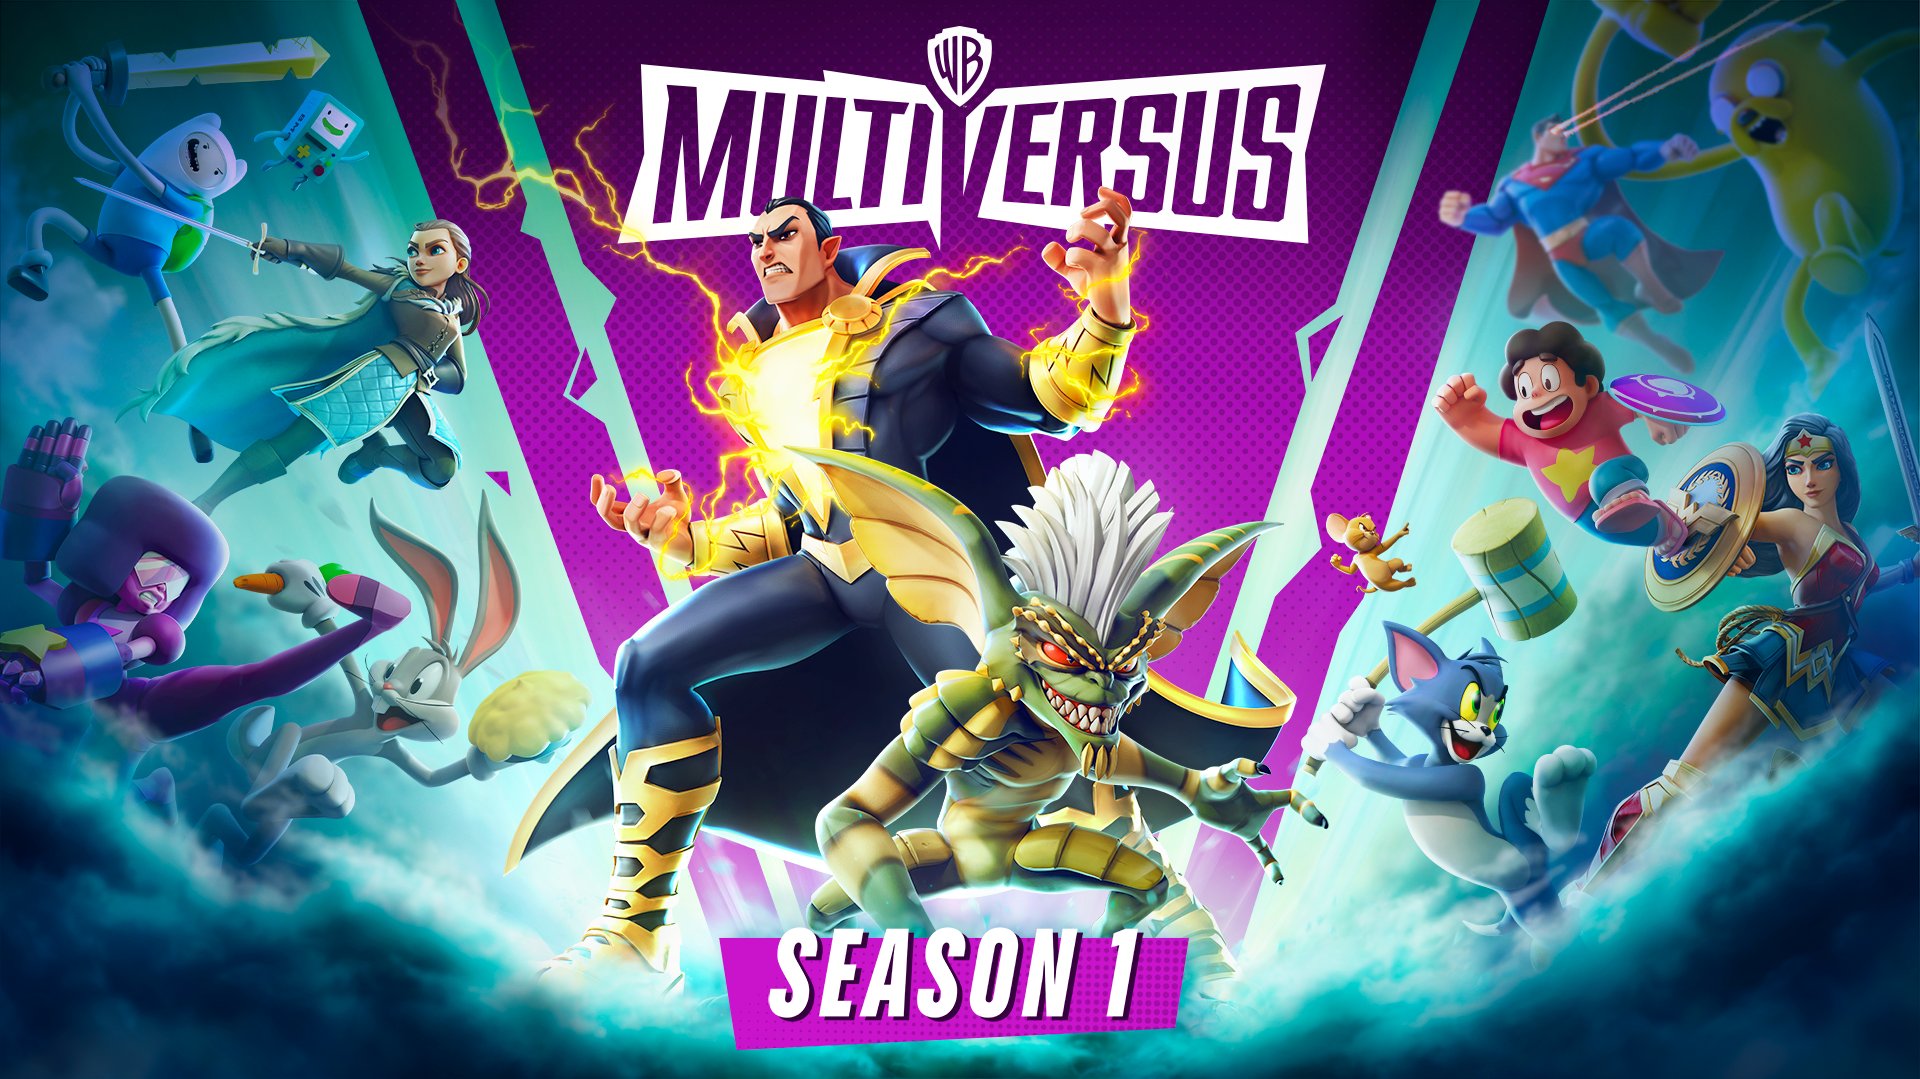 MultiVersus characters Black Adam and Gremlin Leader Stripe announced